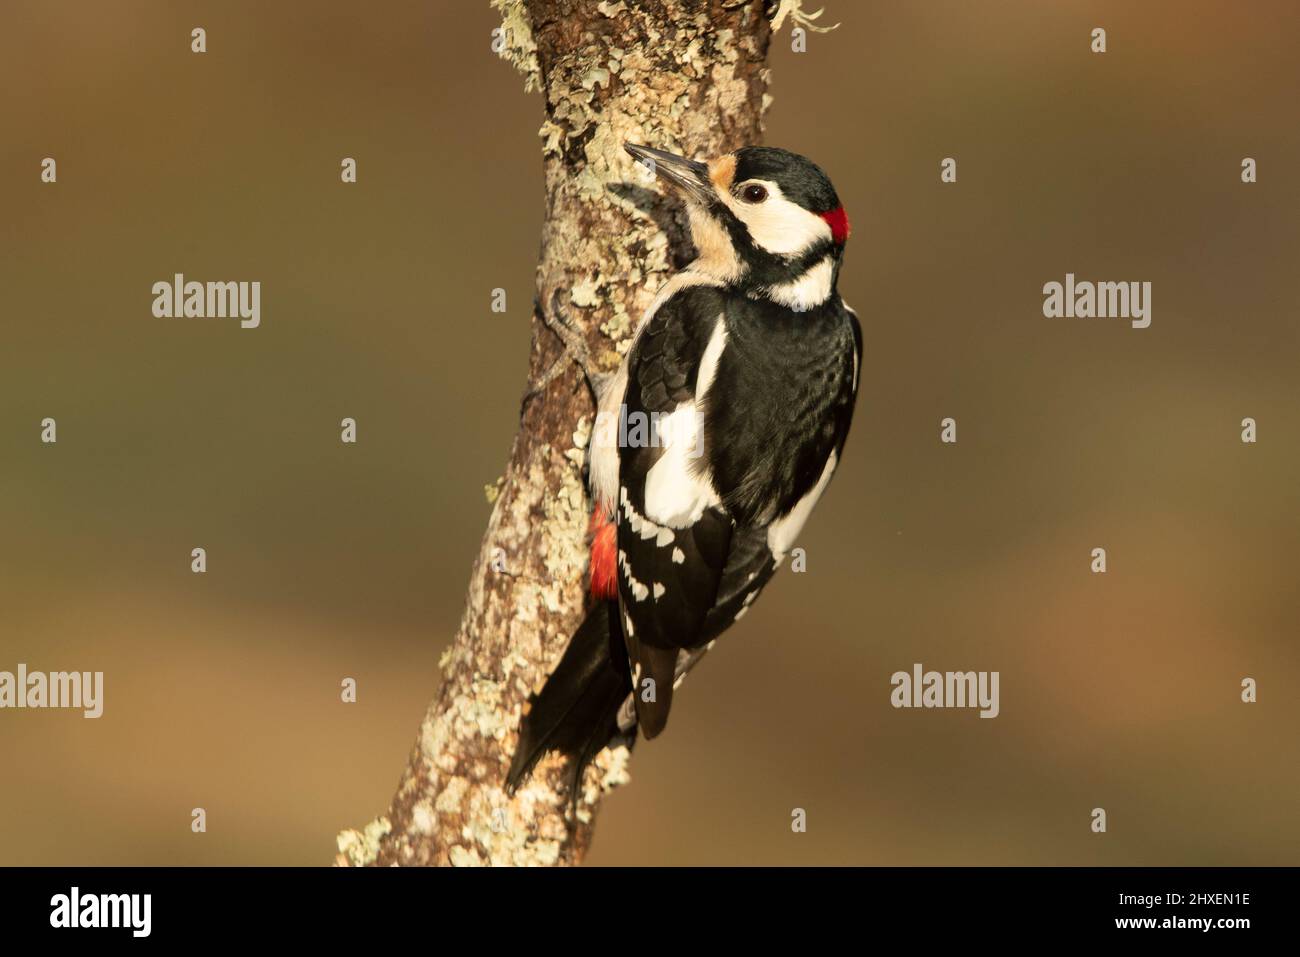 Great spotted woodpecker male in the last light of a spring day in an oak tree in a Mediterranean forest Stock Photo